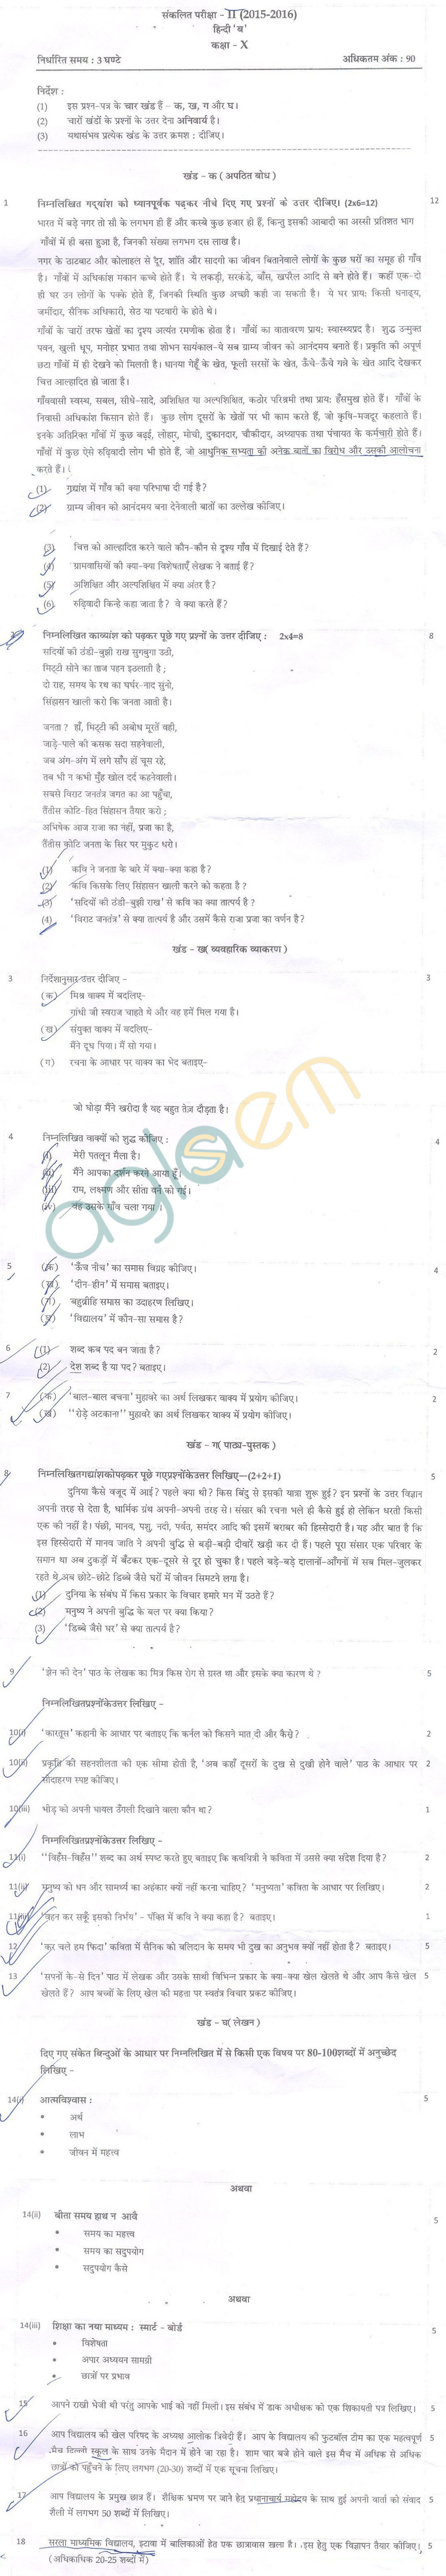 Cbse sample papers for class 10 sa1 english with solutions 2018